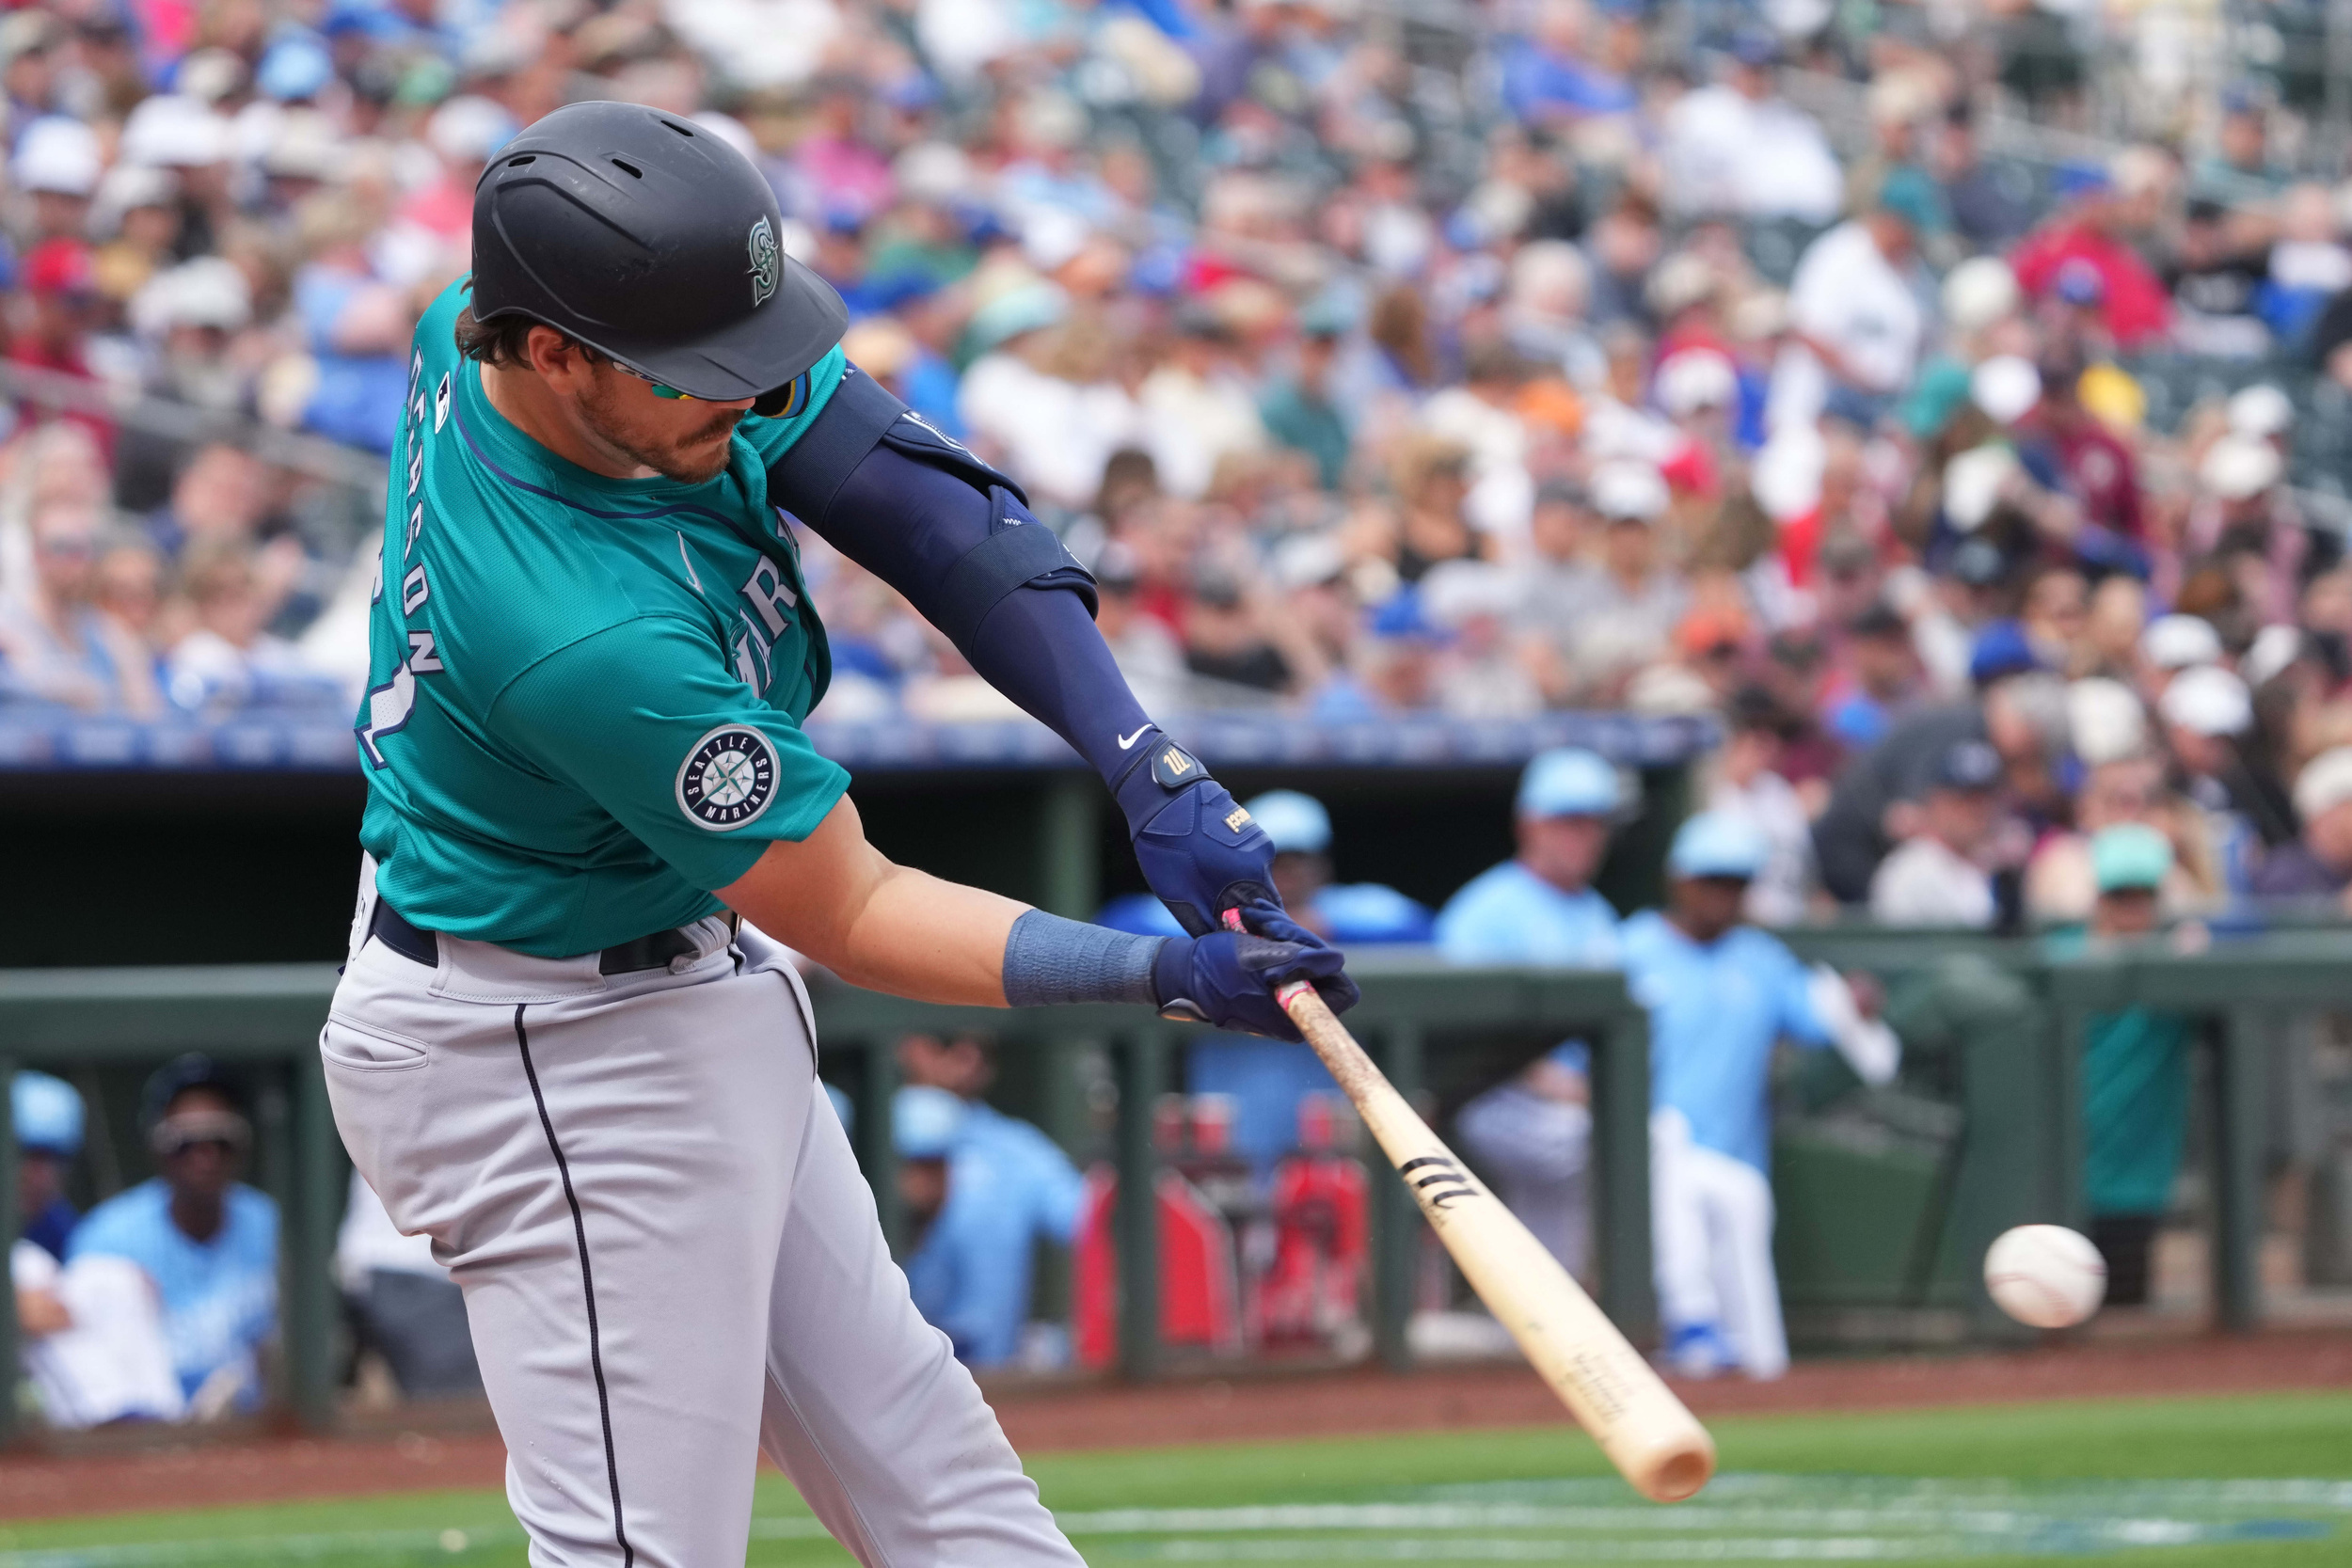 mariners re-sign recently released third baseman